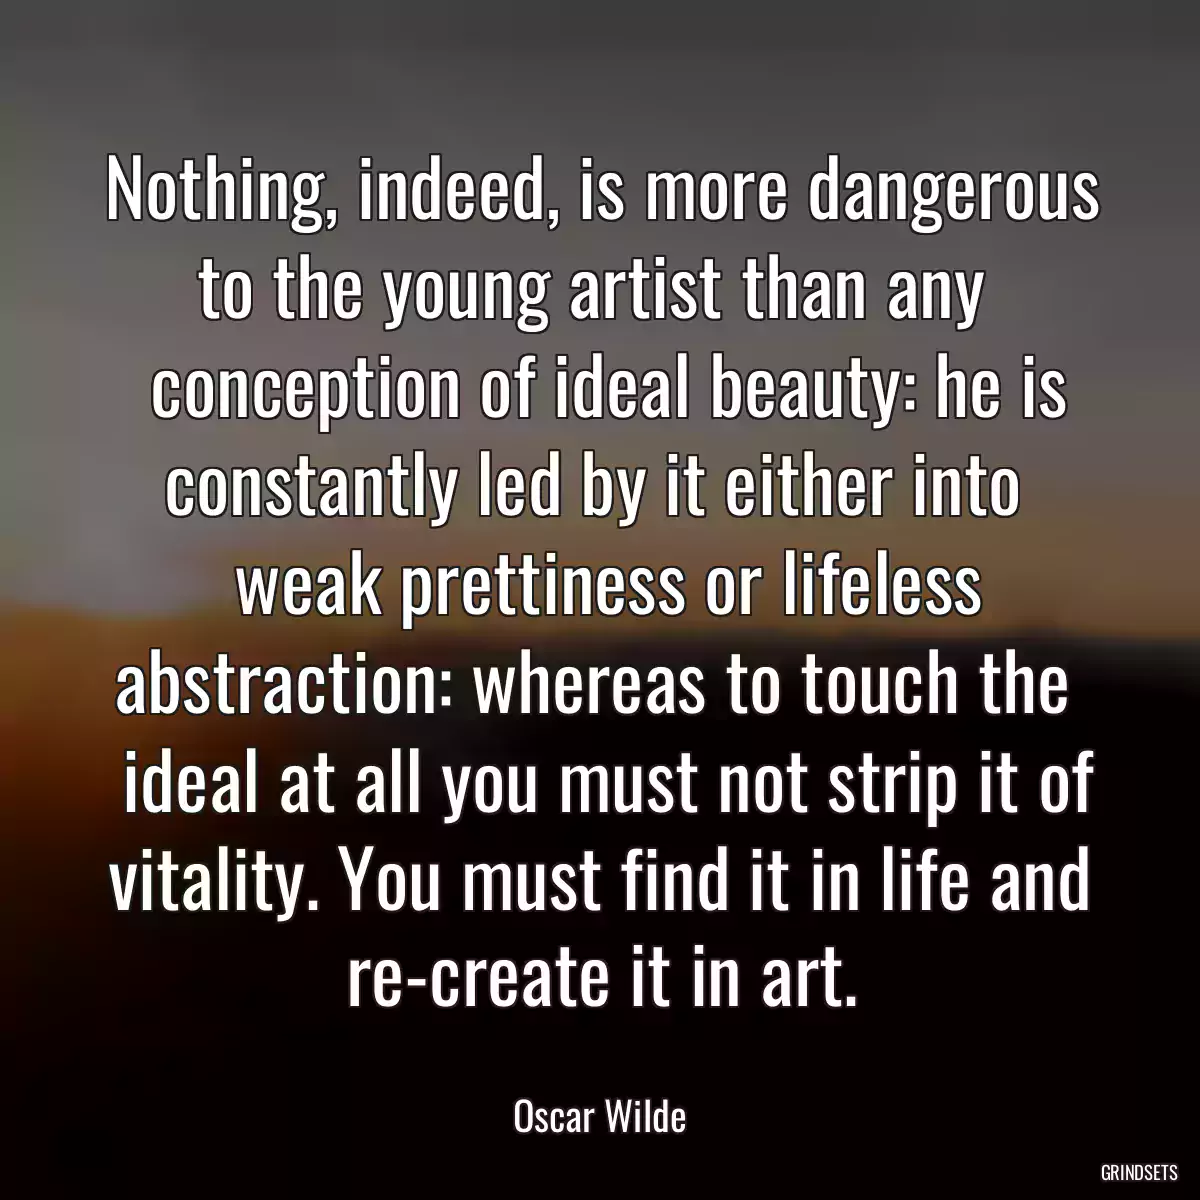 Nothing, indeed, is more dangerous to the young artist than any 
 conception of ideal beauty: he is constantly led by it either into 
 weak prettiness or lifeless abstraction: whereas to touch the 
 ideal at all you must not strip it of vitality. You must find it in life and re-create it in art.